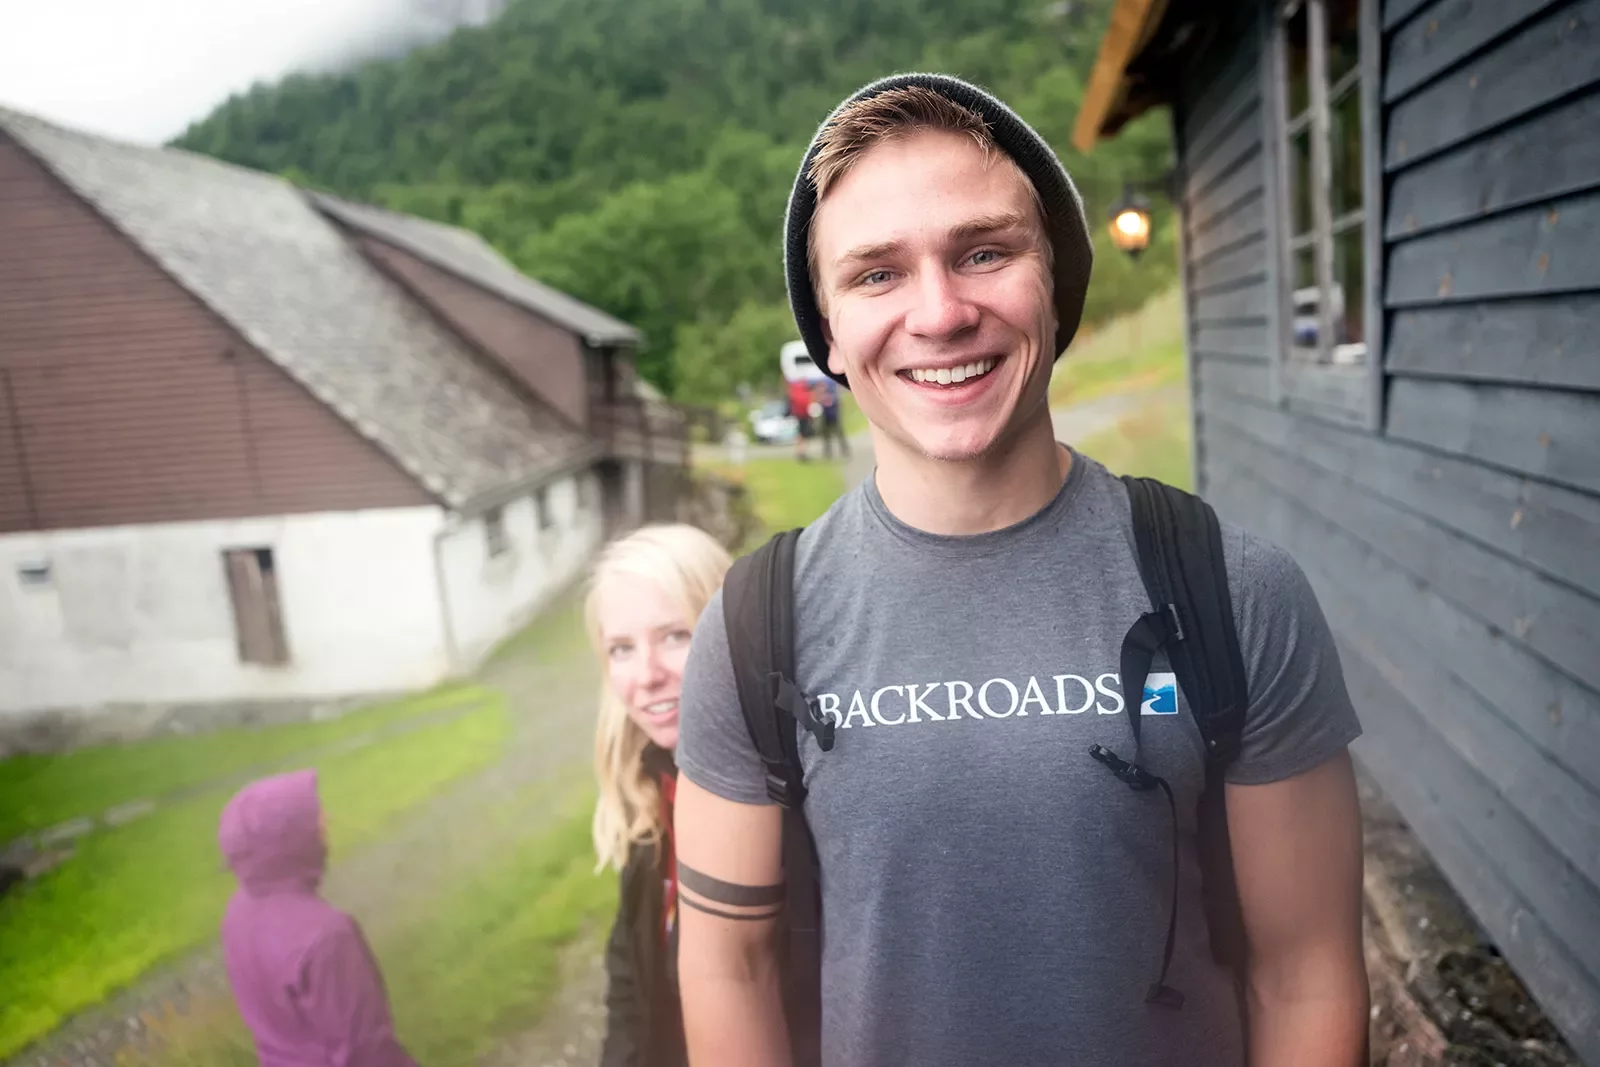 Young hiker in a Backroads t-shirt